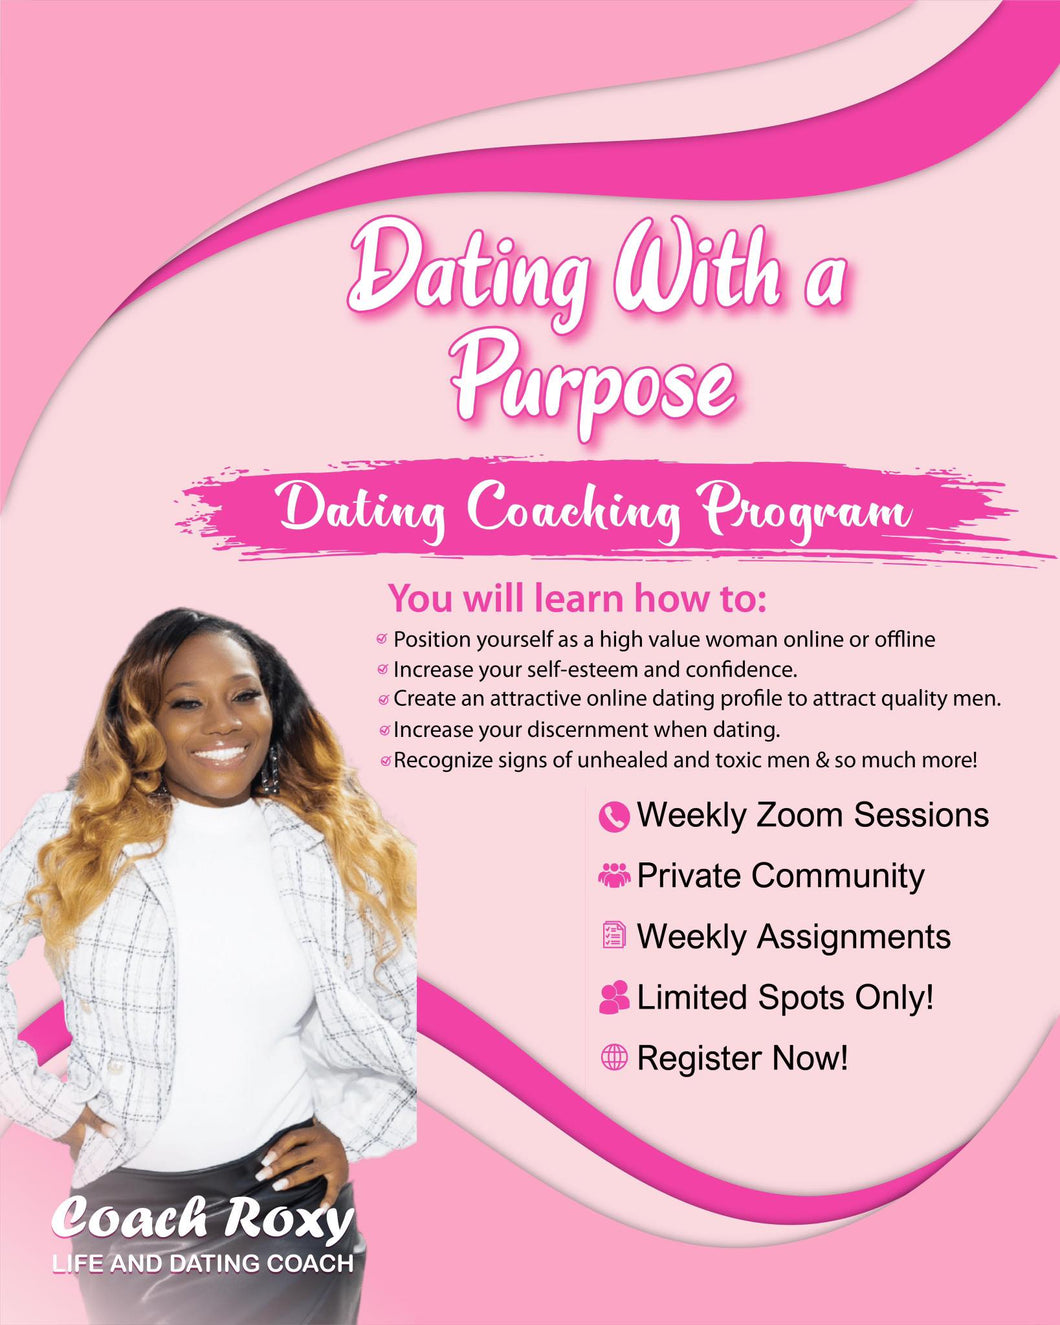 Dating with a purpose Group Coaching Program